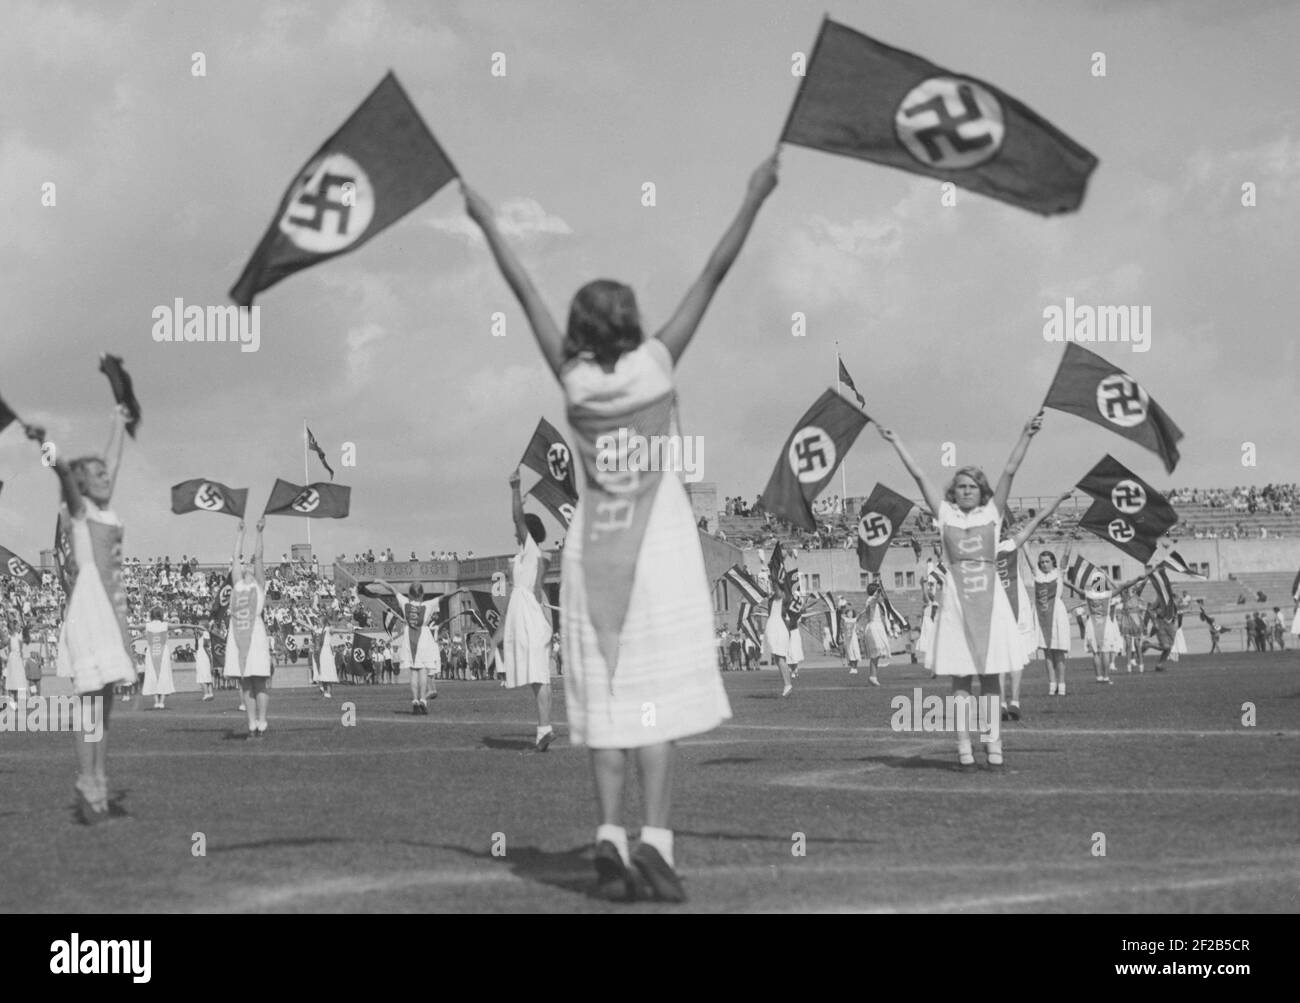 Germany in the 1930s. German schoolchildren practice a routine on Berlins sportsarena Deutsches Stadion. Using the national socialist flag is part of the routine. The flag became Nazi Germanys only offical flag from 1935. Stock Photo